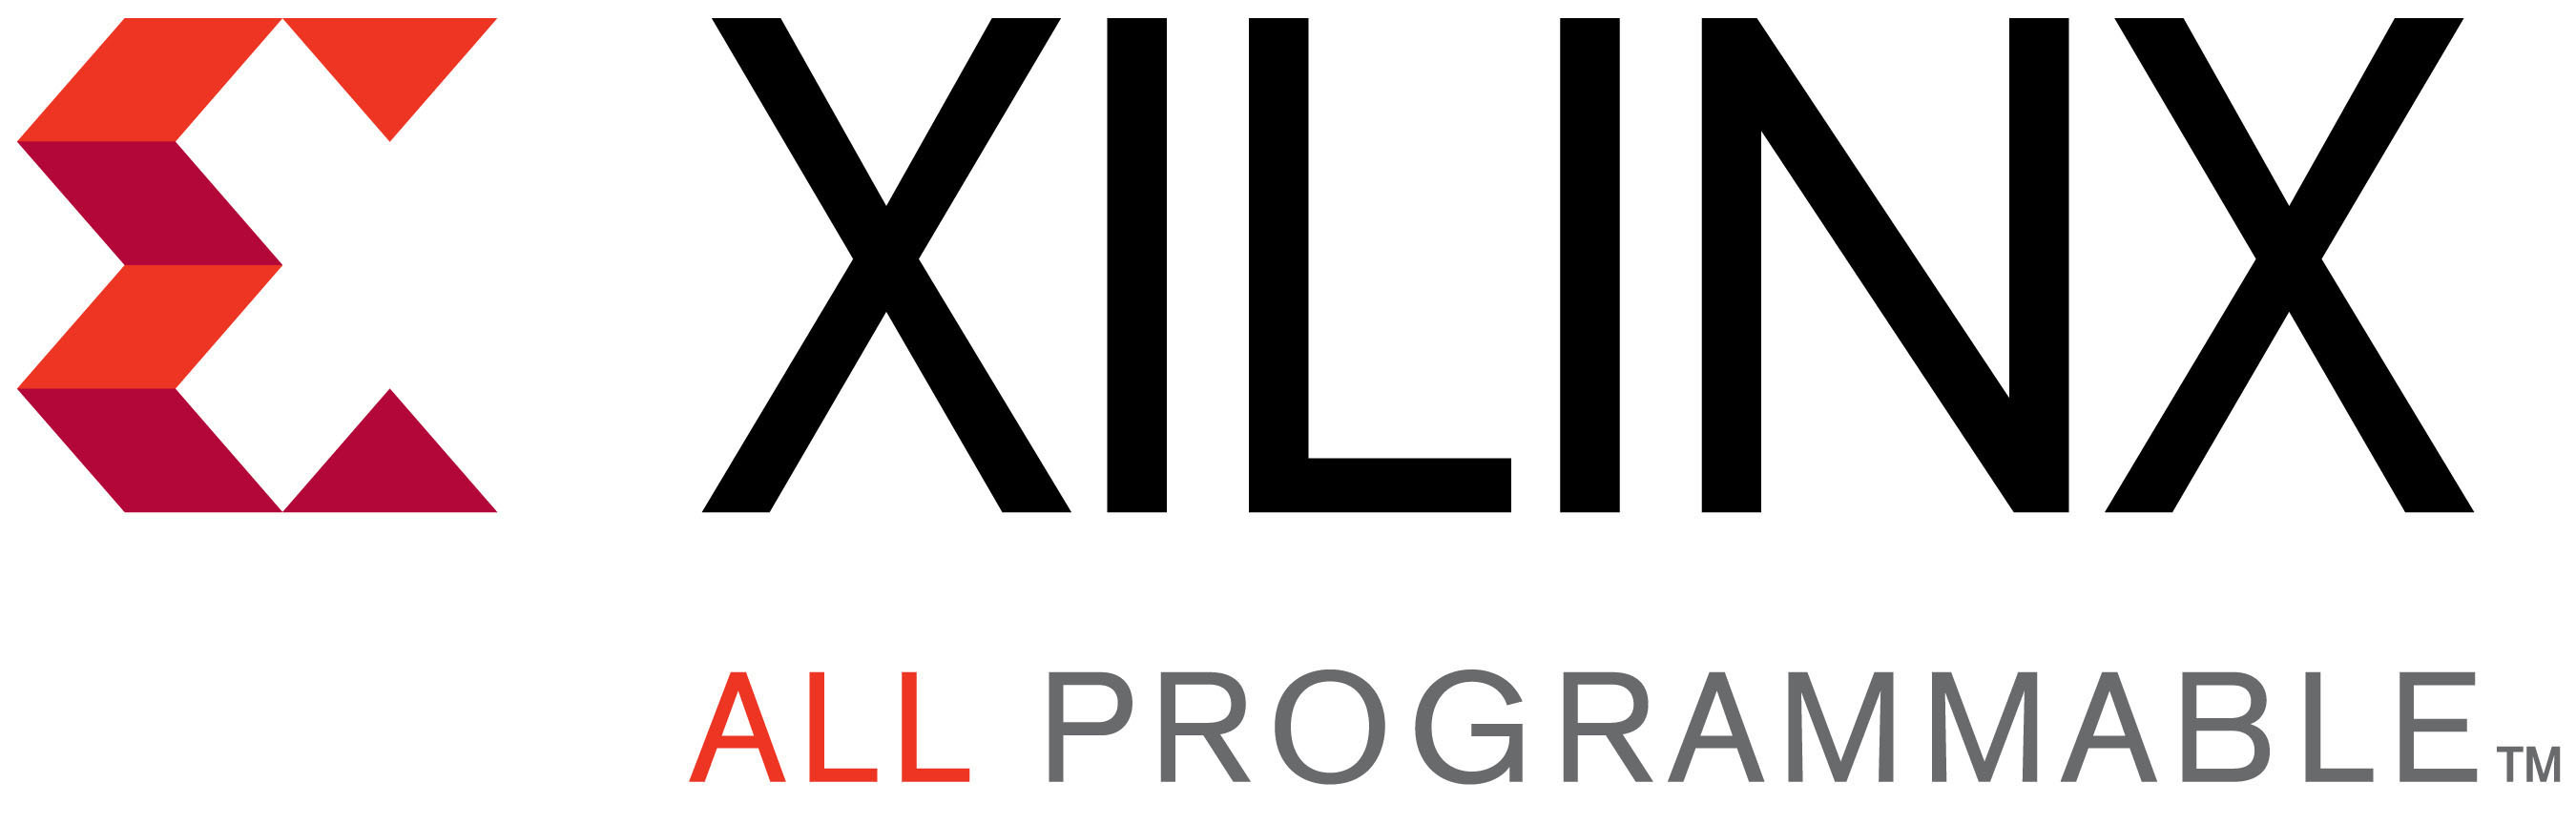 Xilinx is the worldwide leader of programmable logic solutions.